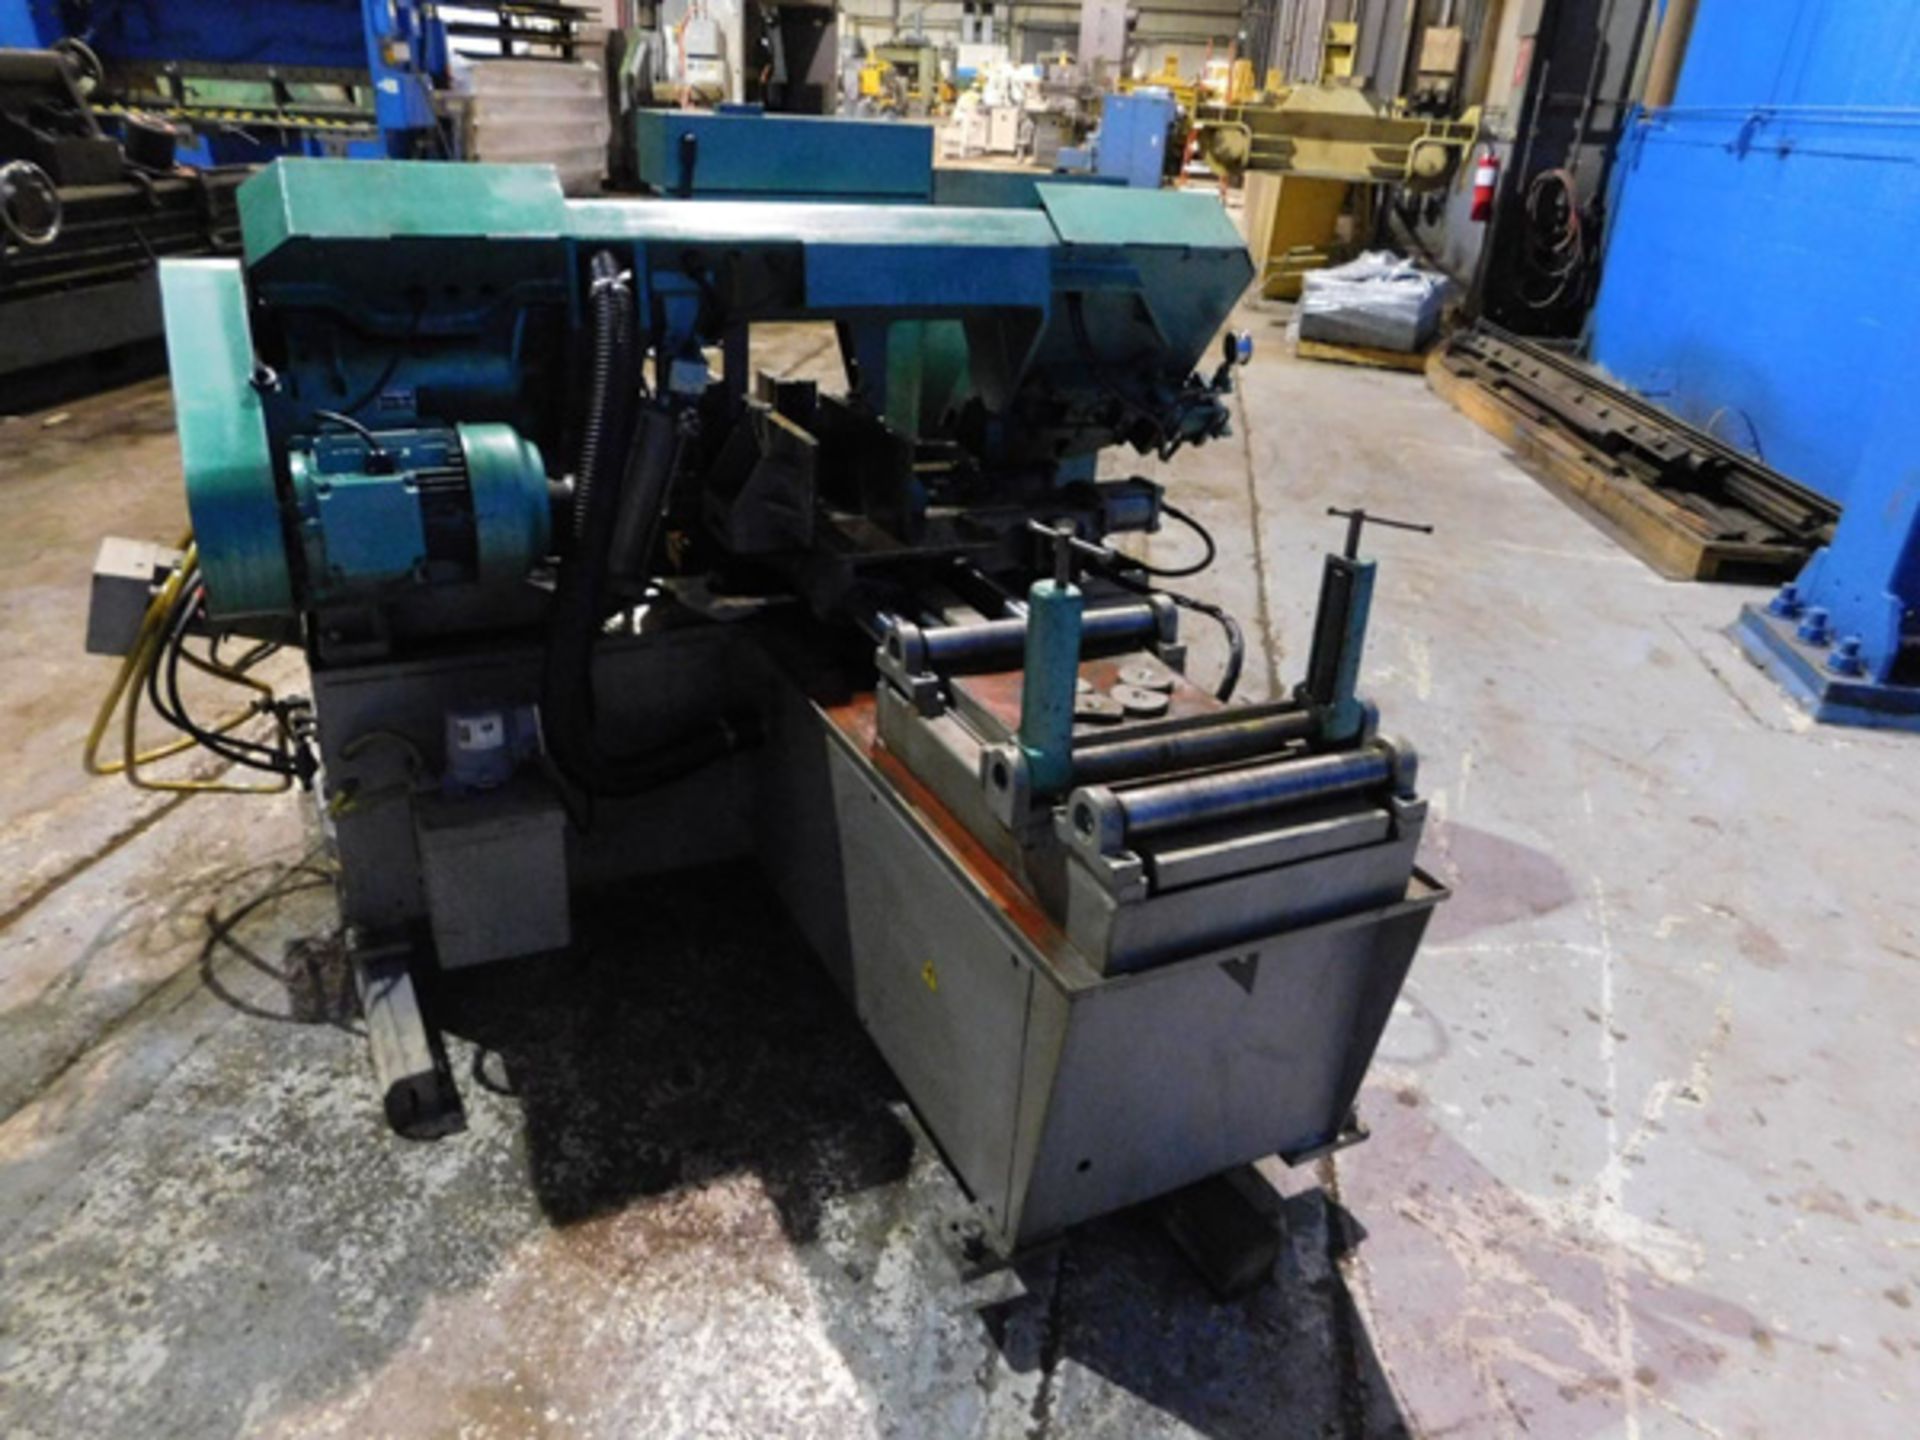 2005 Peerless Automatic Horizontal Band Saw, 12" x 13.4" - Mdl: HB1212NC - S/N: C941269 - Location - Image 8 of 12